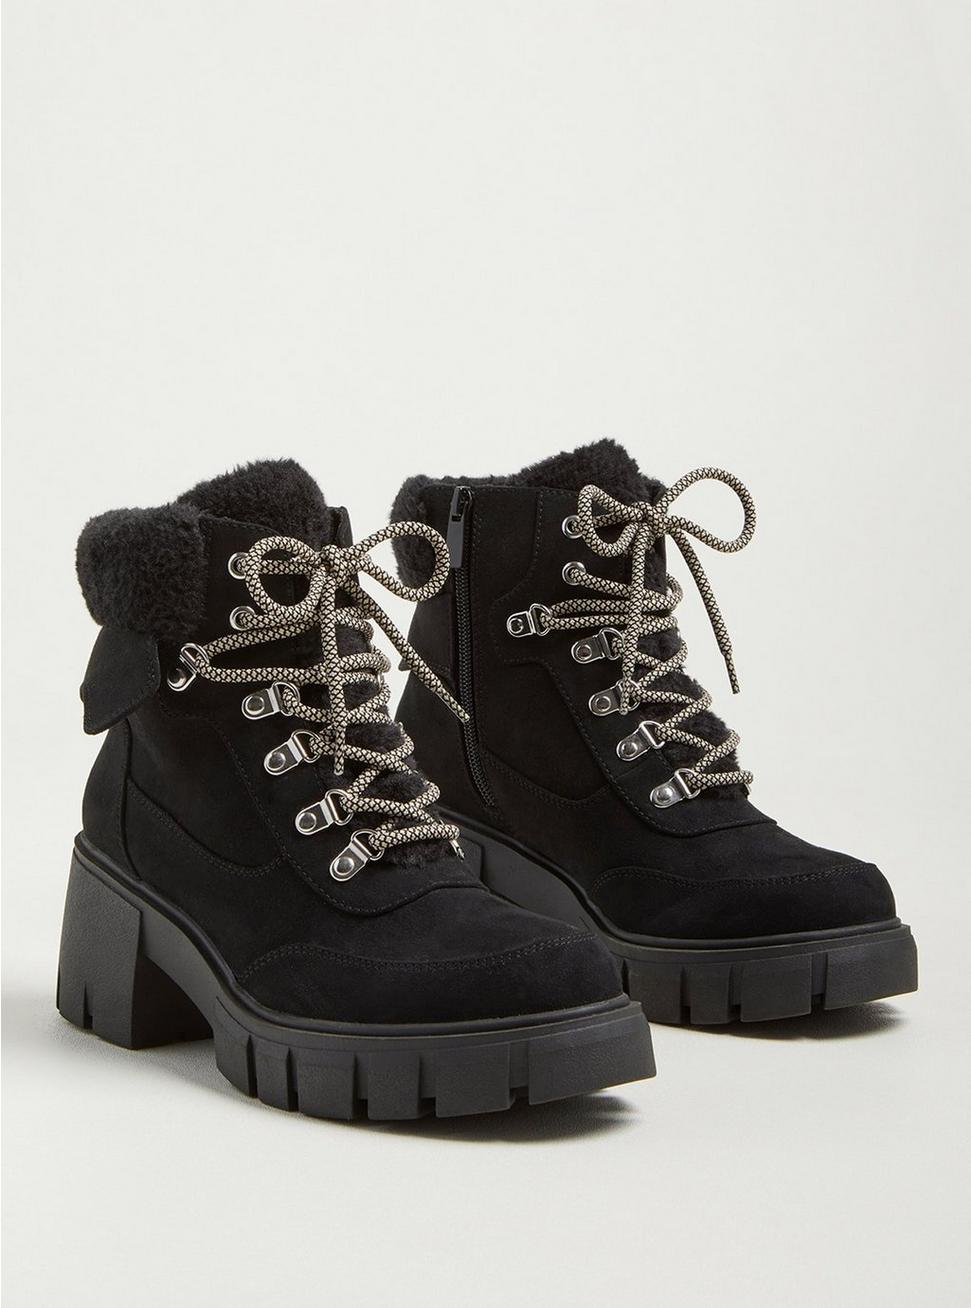 Shearling Laceup Chunky Bootie - Black (WW), BLACK, hi-res